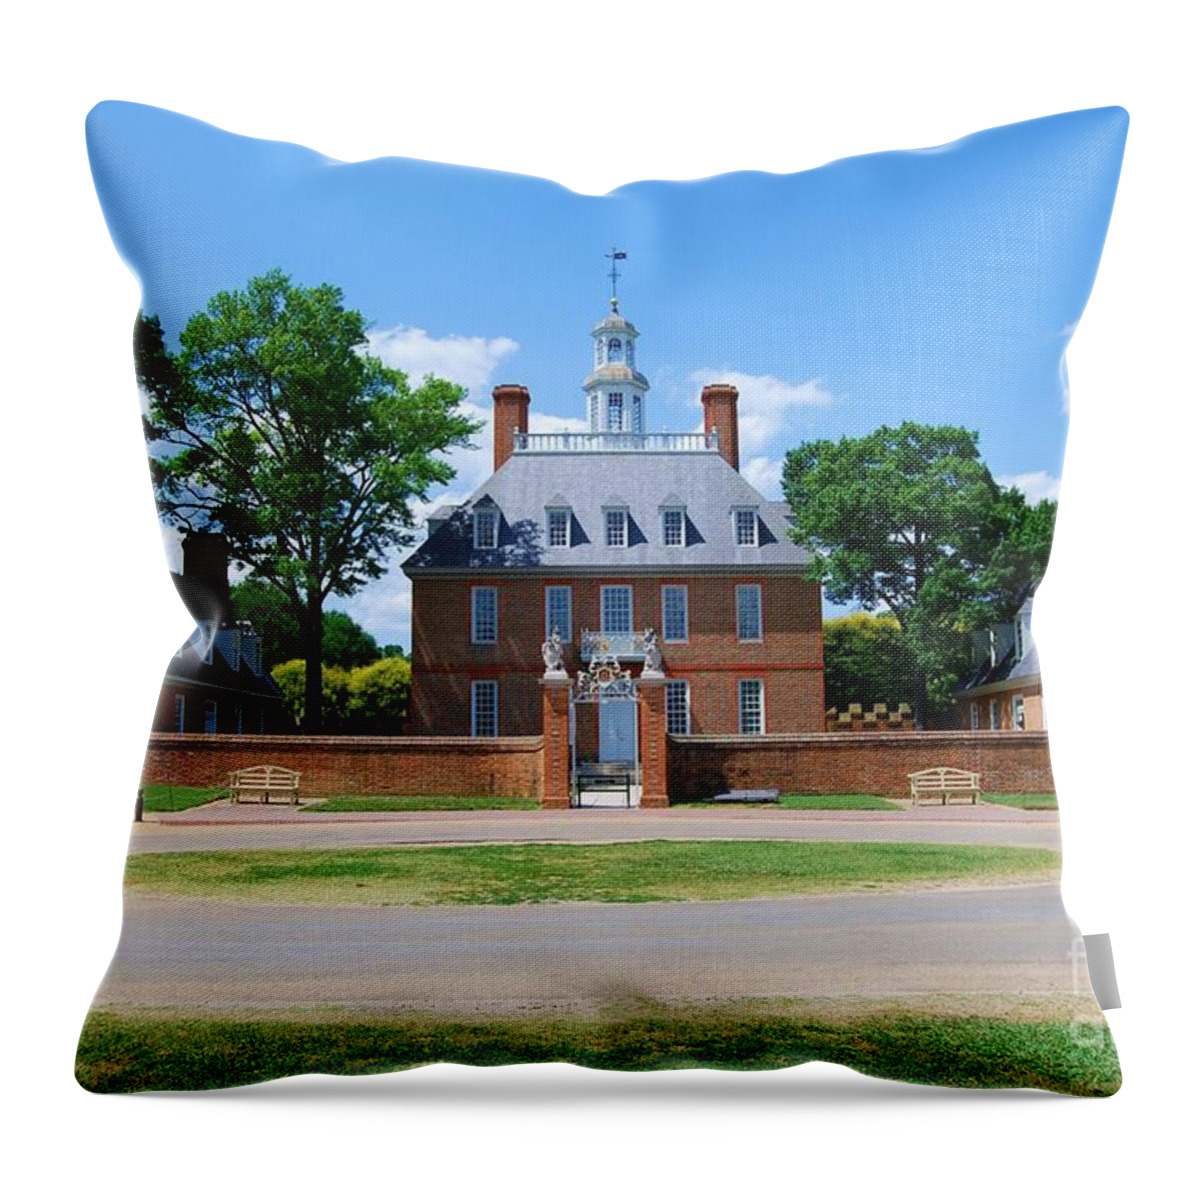 Landscape Throw Pillow featuring the photograph Mansion by Eric Liller